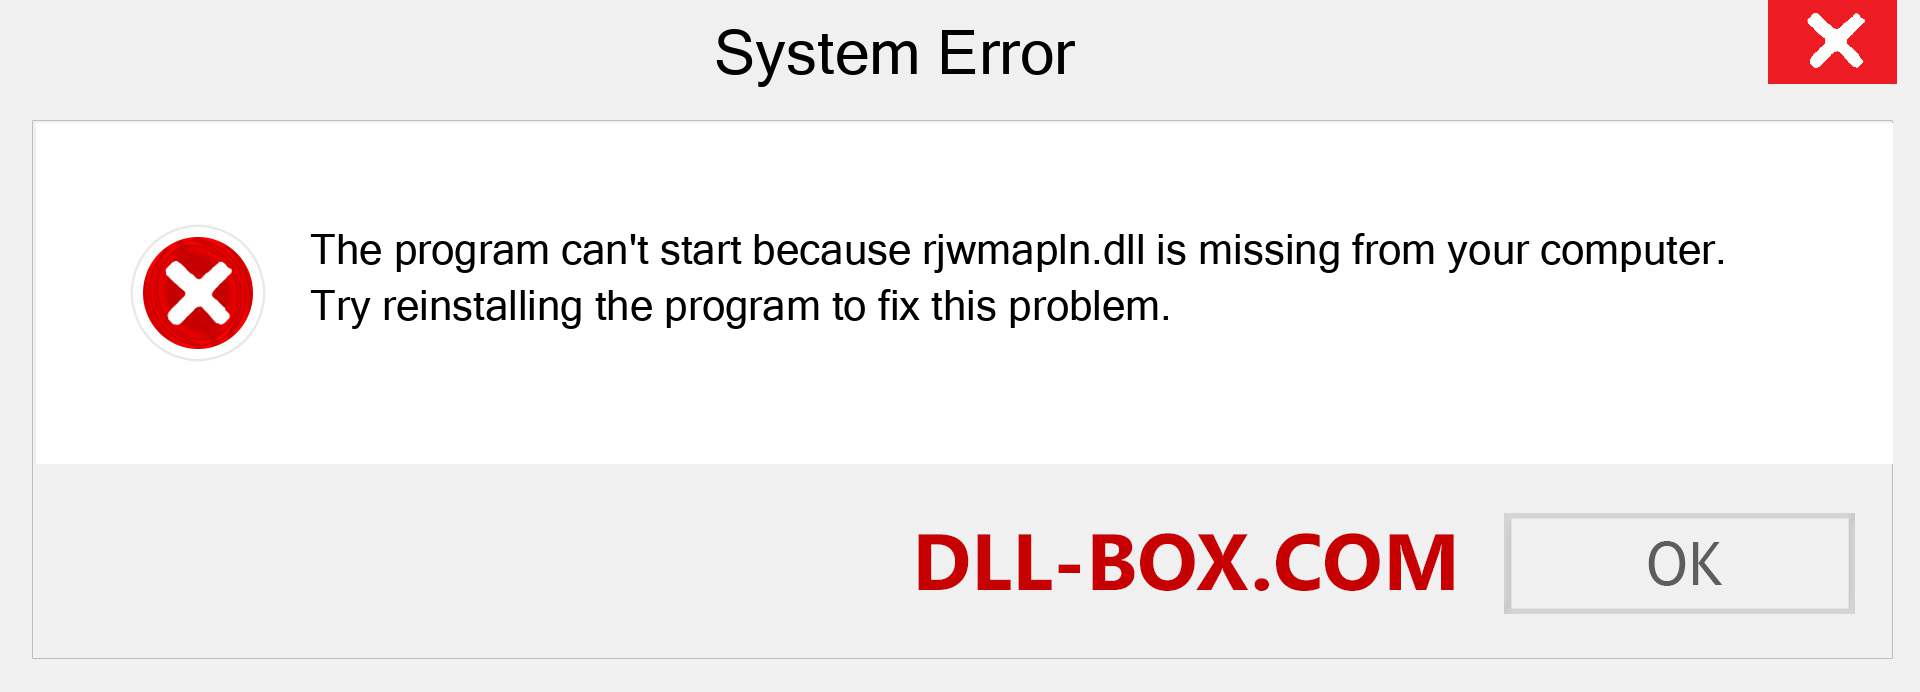  rjwmapln.dll file is missing?. Download for Windows 7, 8, 10 - Fix  rjwmapln dll Missing Error on Windows, photos, images